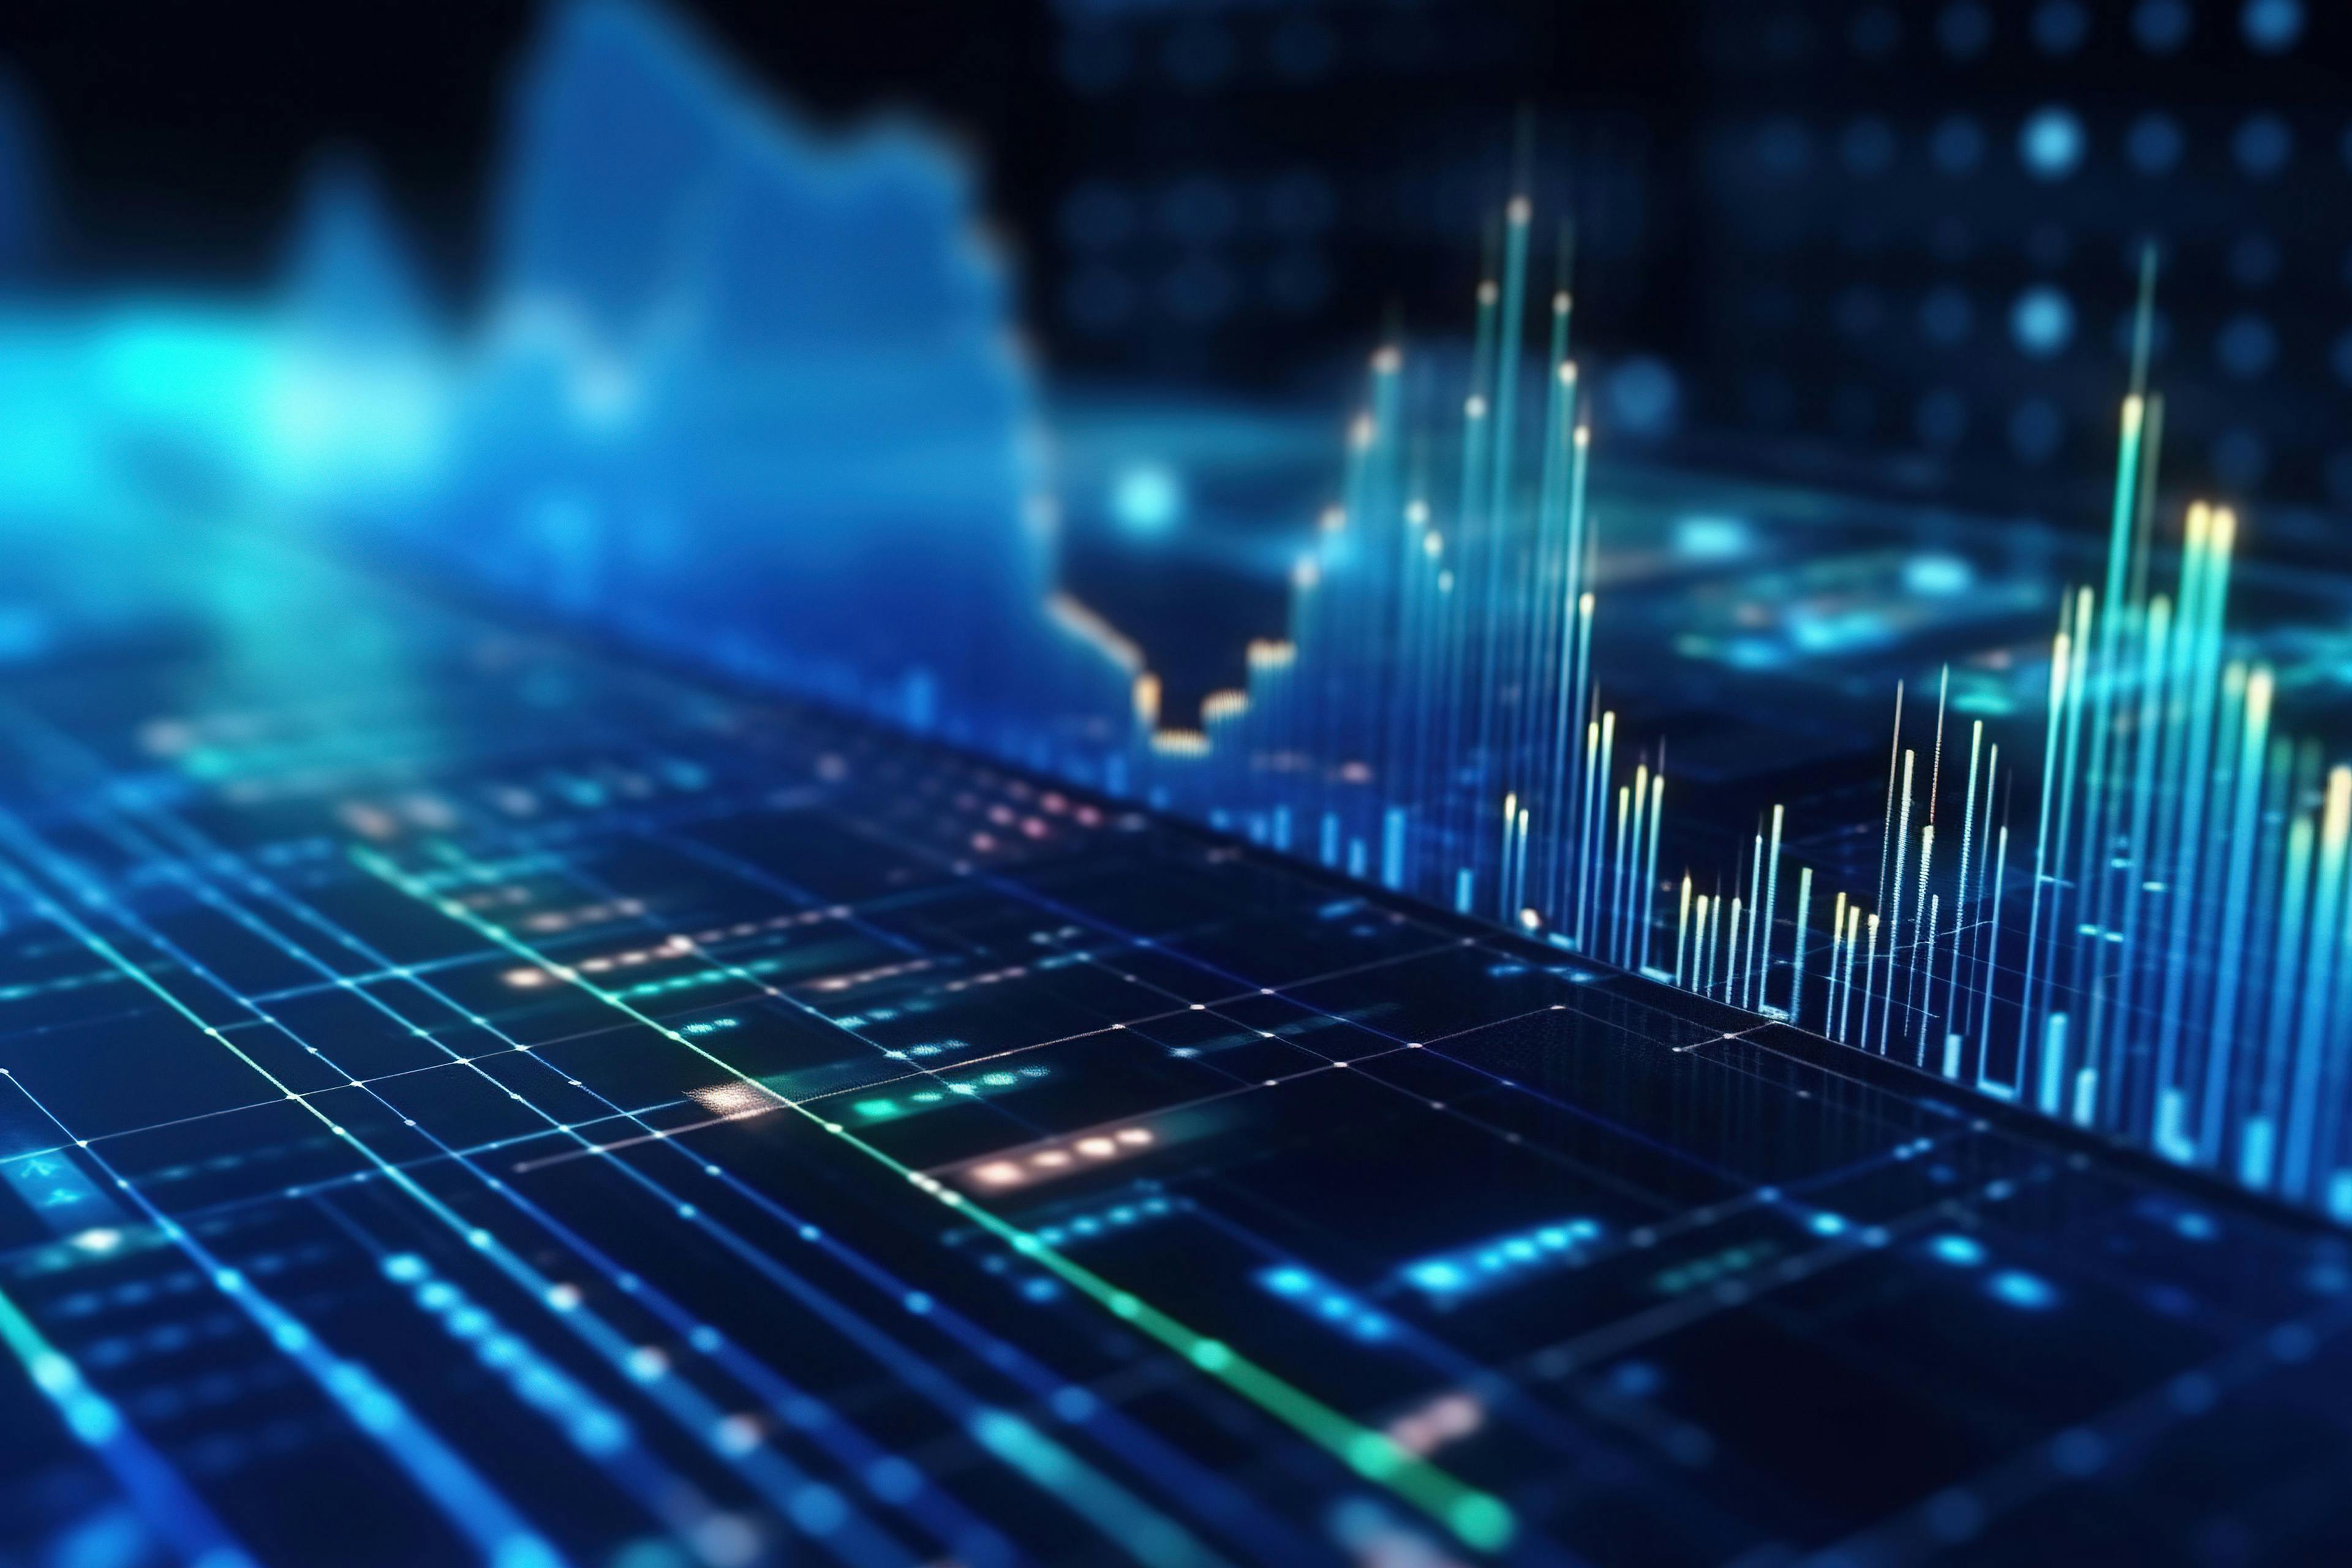 Perspective view of stock market growth, business investing and data concept with digital financial chart graphs, diagrams and indicators on dark blue blurry background | Image Credit: © Livinskiy - stock.adobe.com